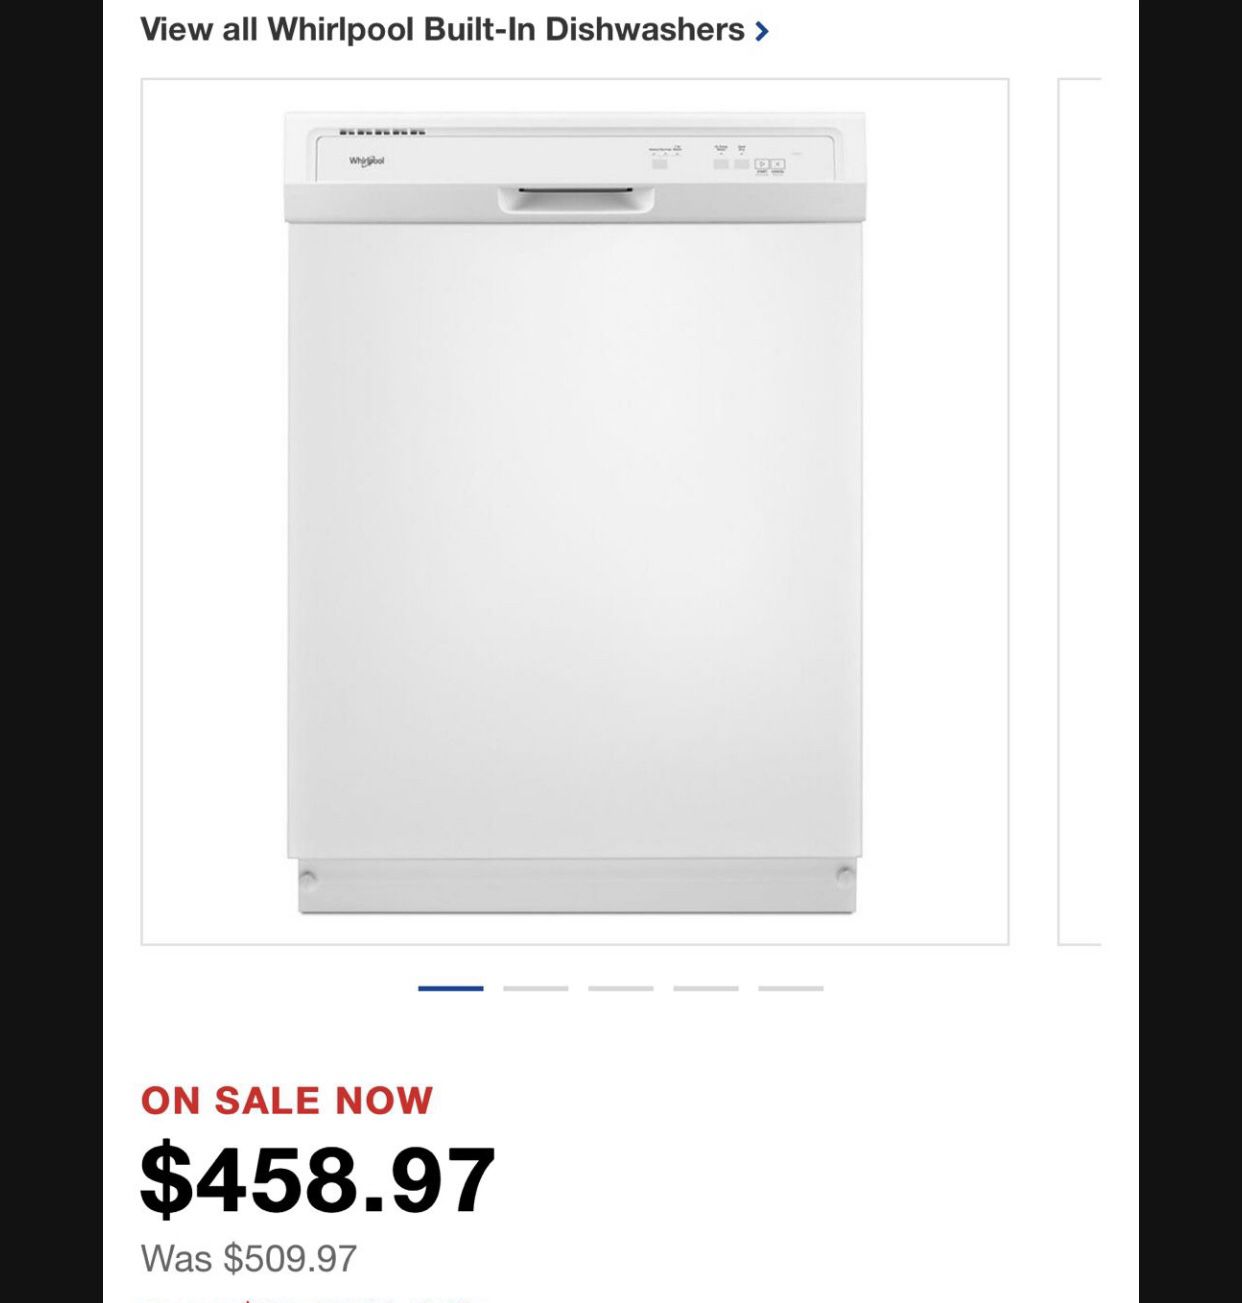 Whirlpool dishwasher BRAND NEW NEVER USED ( Measure it Wrong  For My House) 